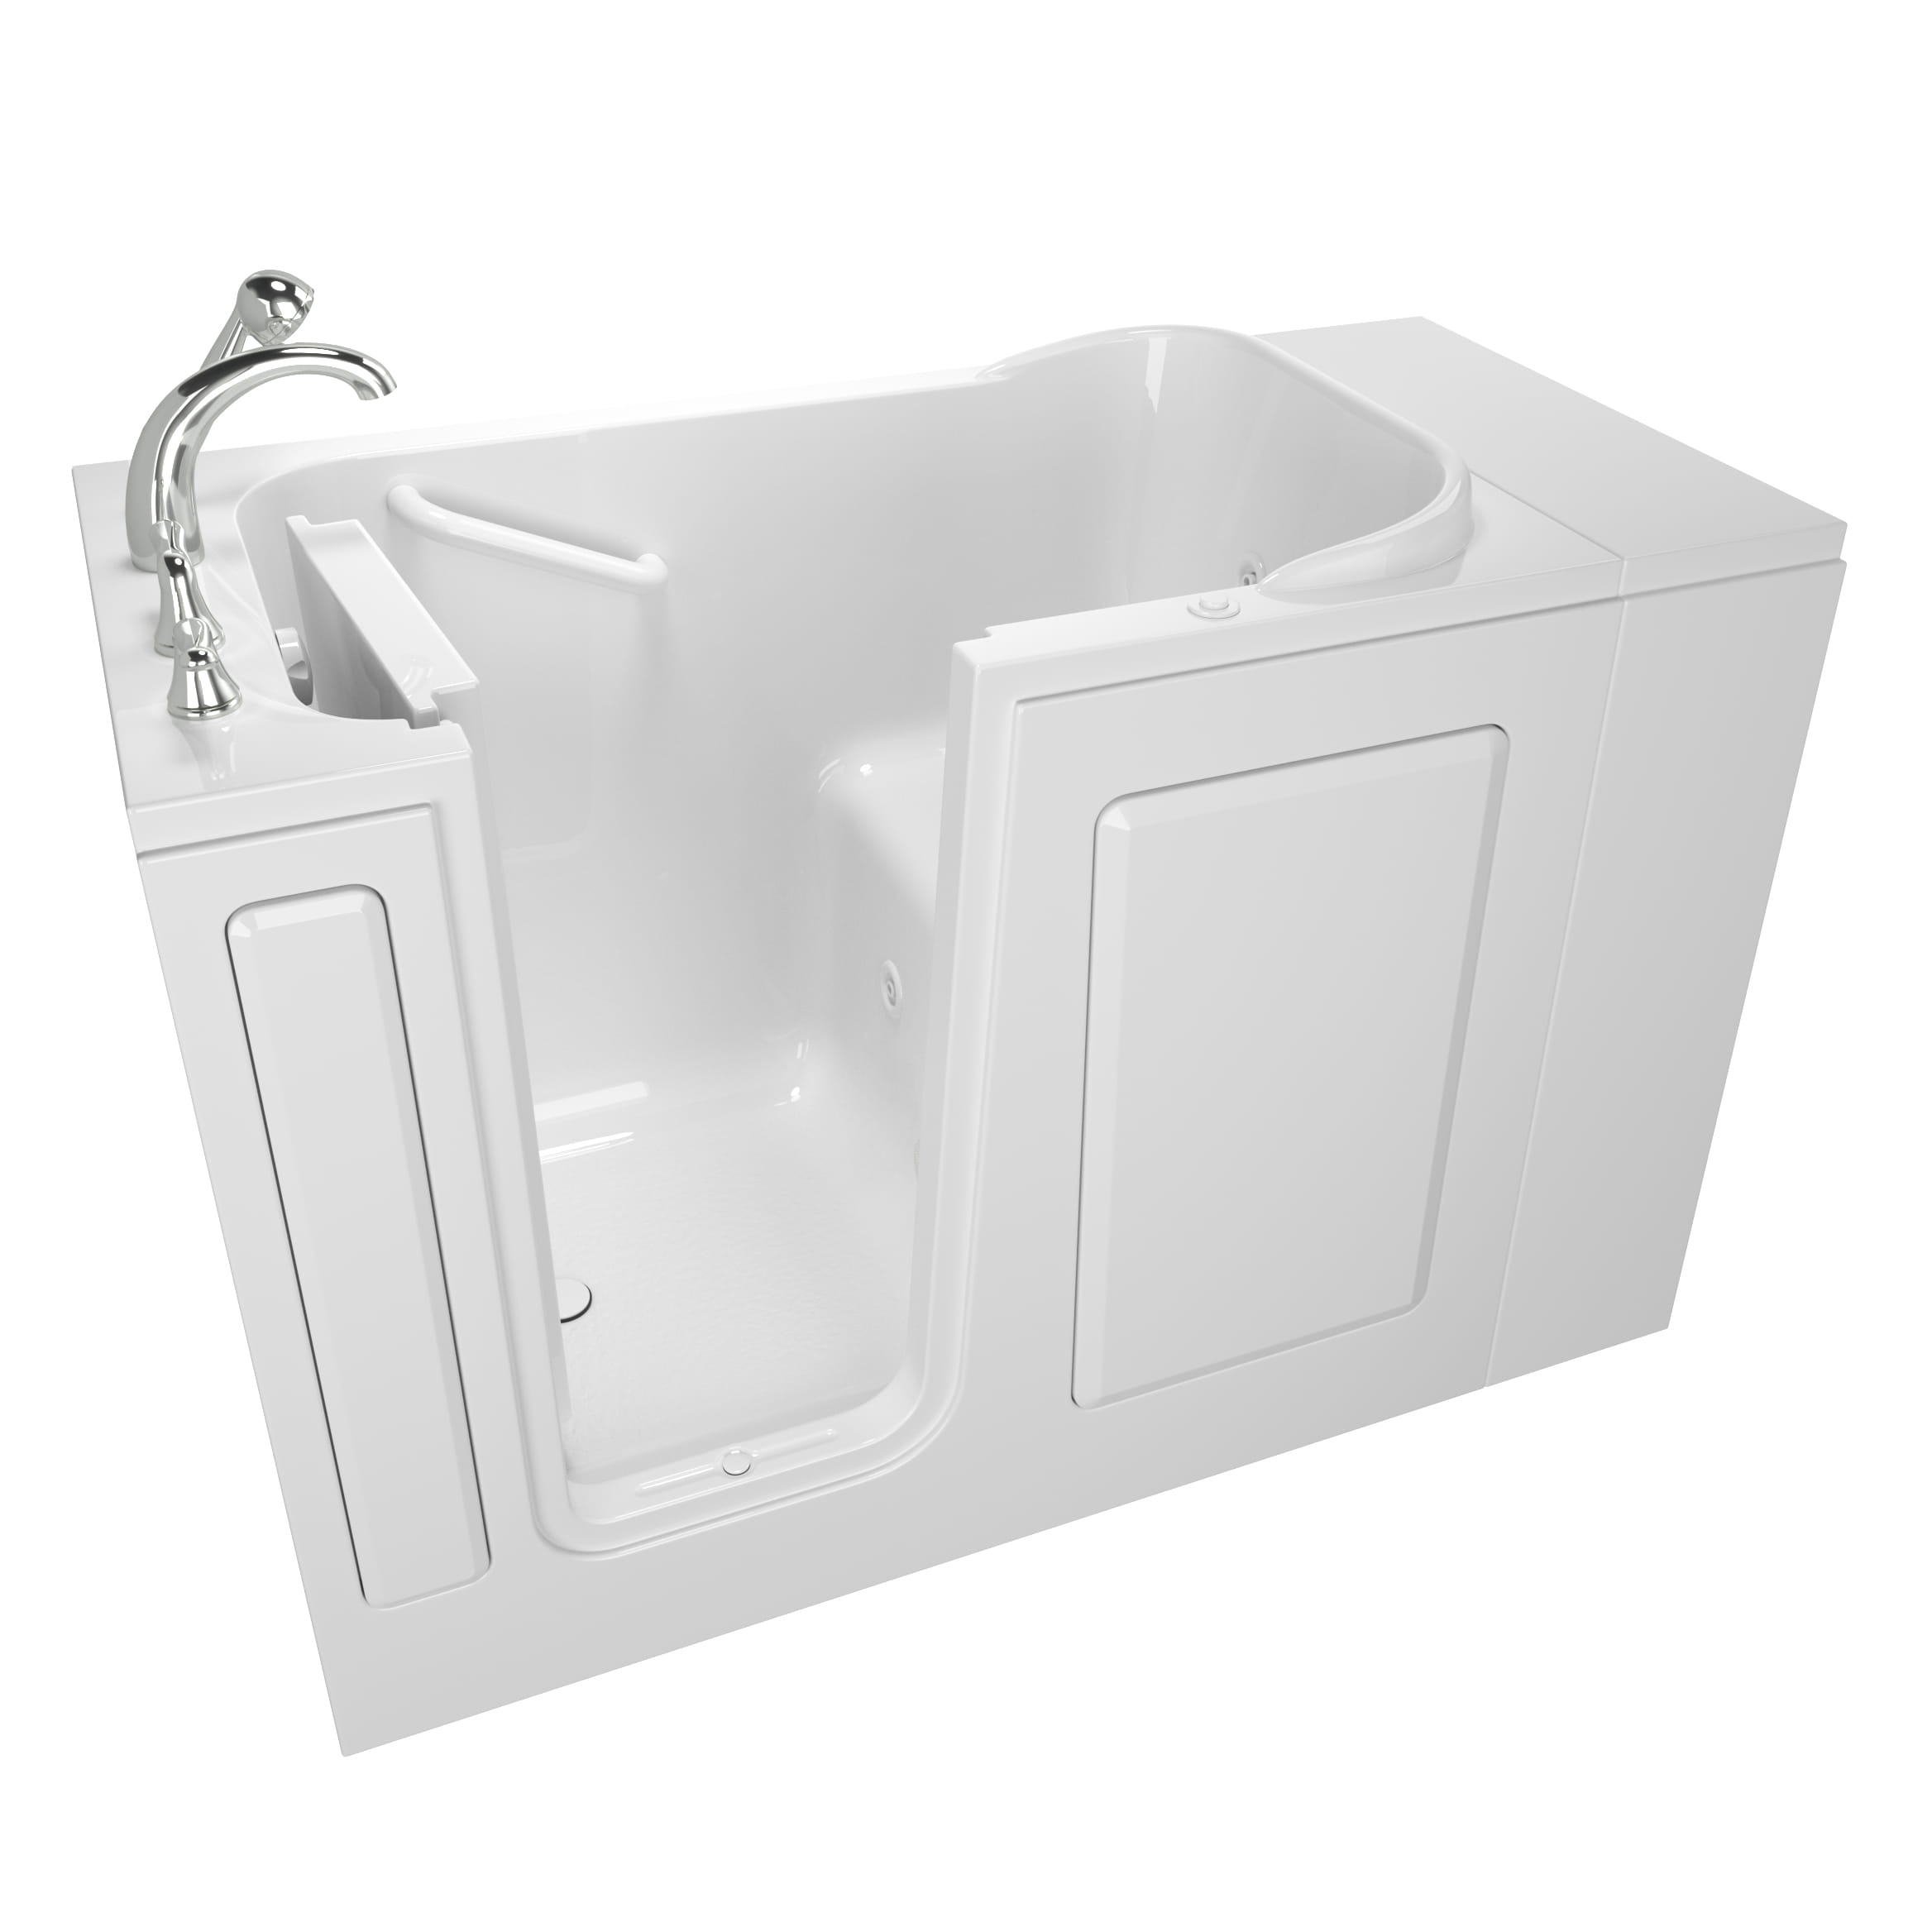 Gelcoat Entry Series 48 x 28-Inch Walk-In Tub With Whirlpool System – Left-Hand Drain With Faucet